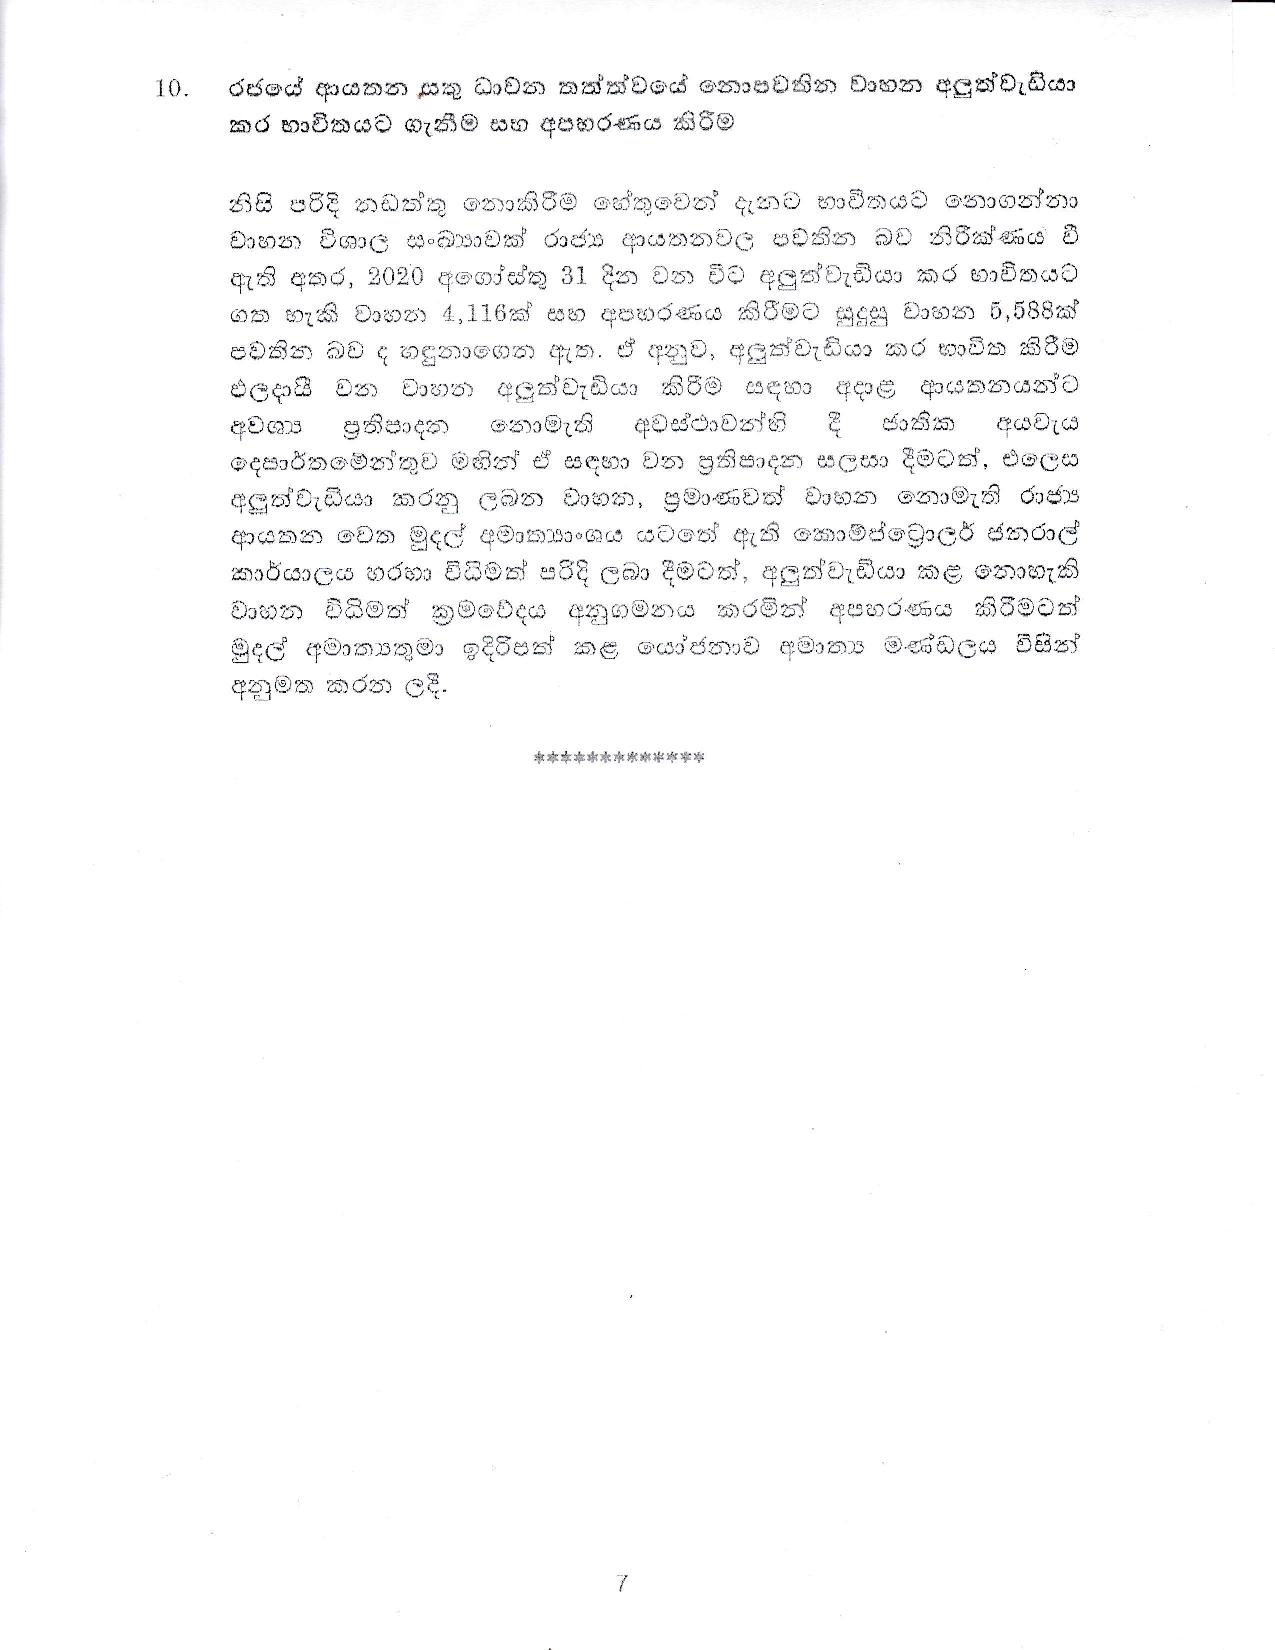 Cabinet decision on 02.09.2020 page 007